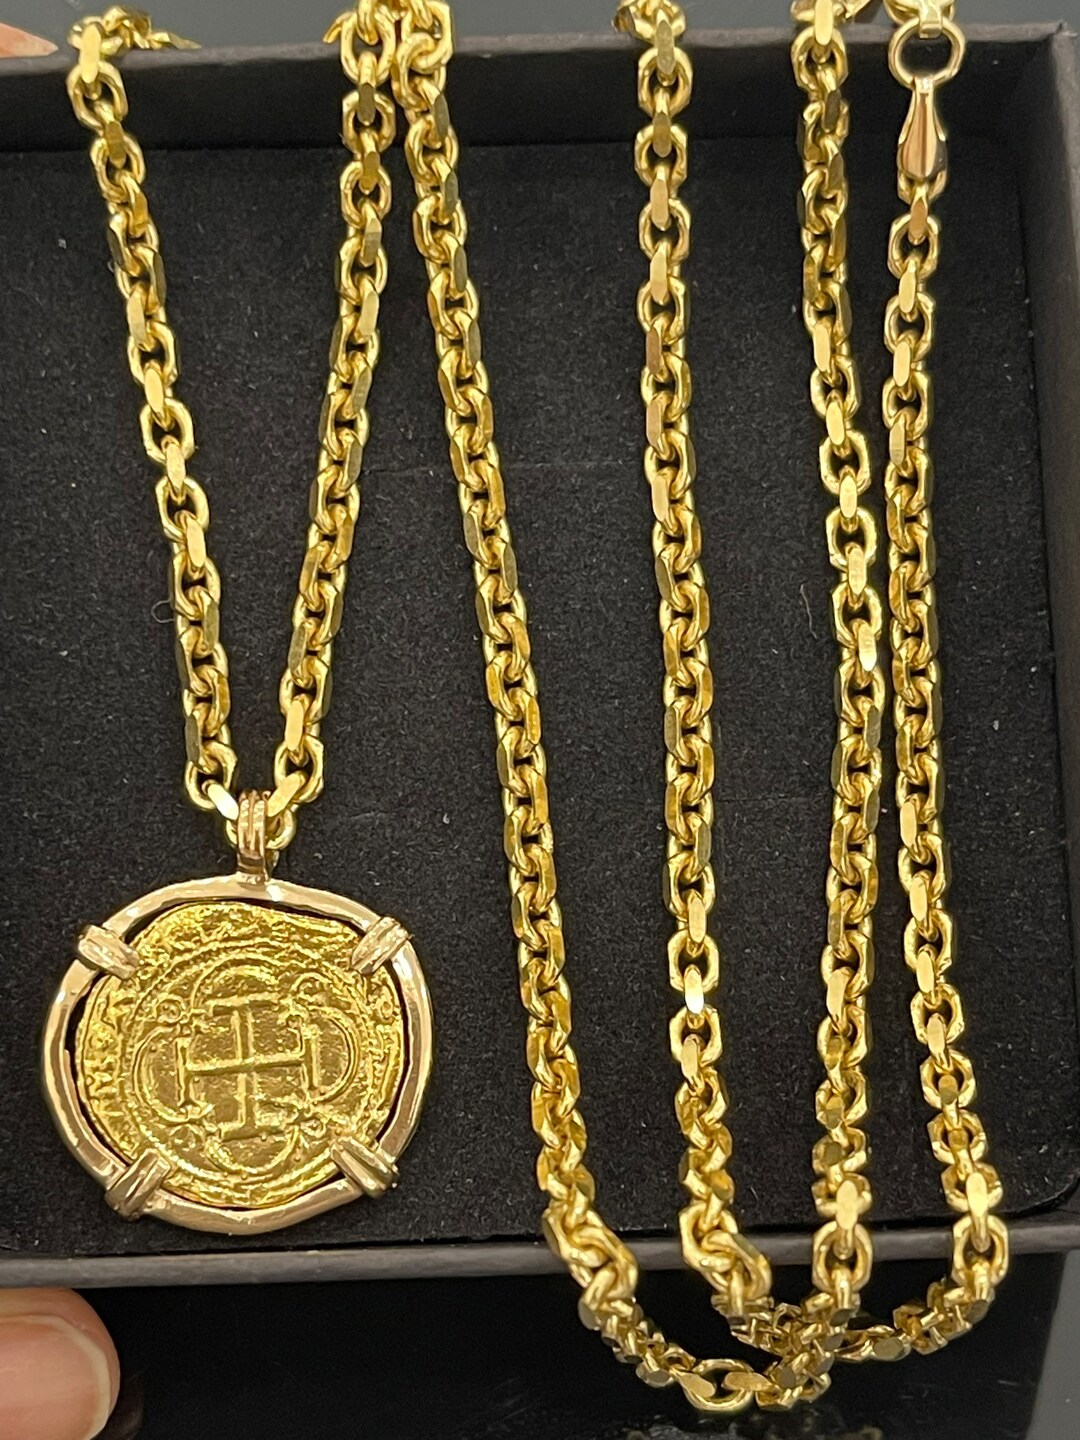 14k Handmade Atocha Shipwreck Gold Coin Pendant With 14k Solid - Etsy